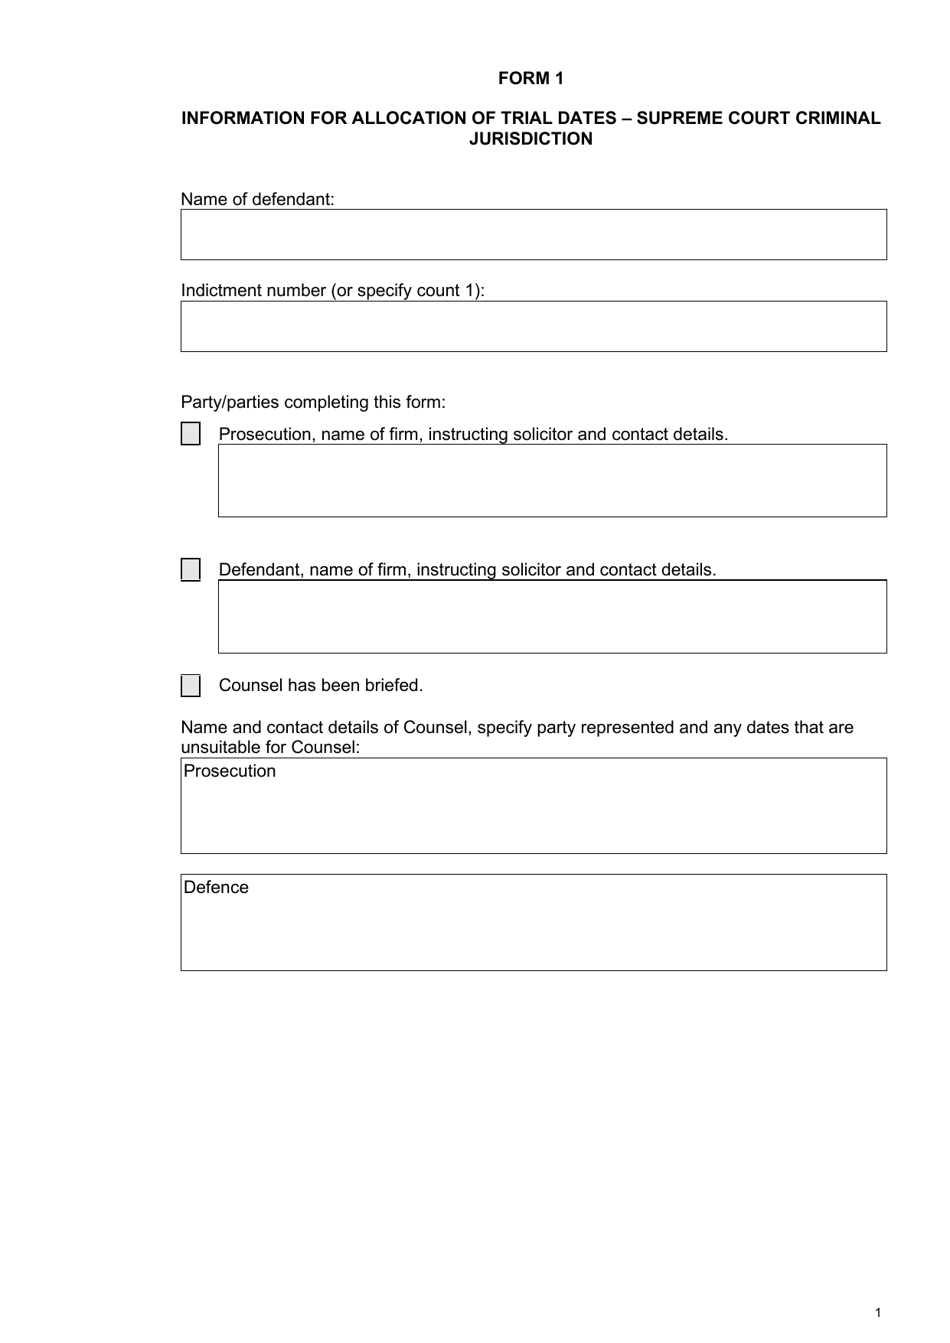 Form 1 Information for Allocation of Trial Dates - Queensland, Australia, Page 1